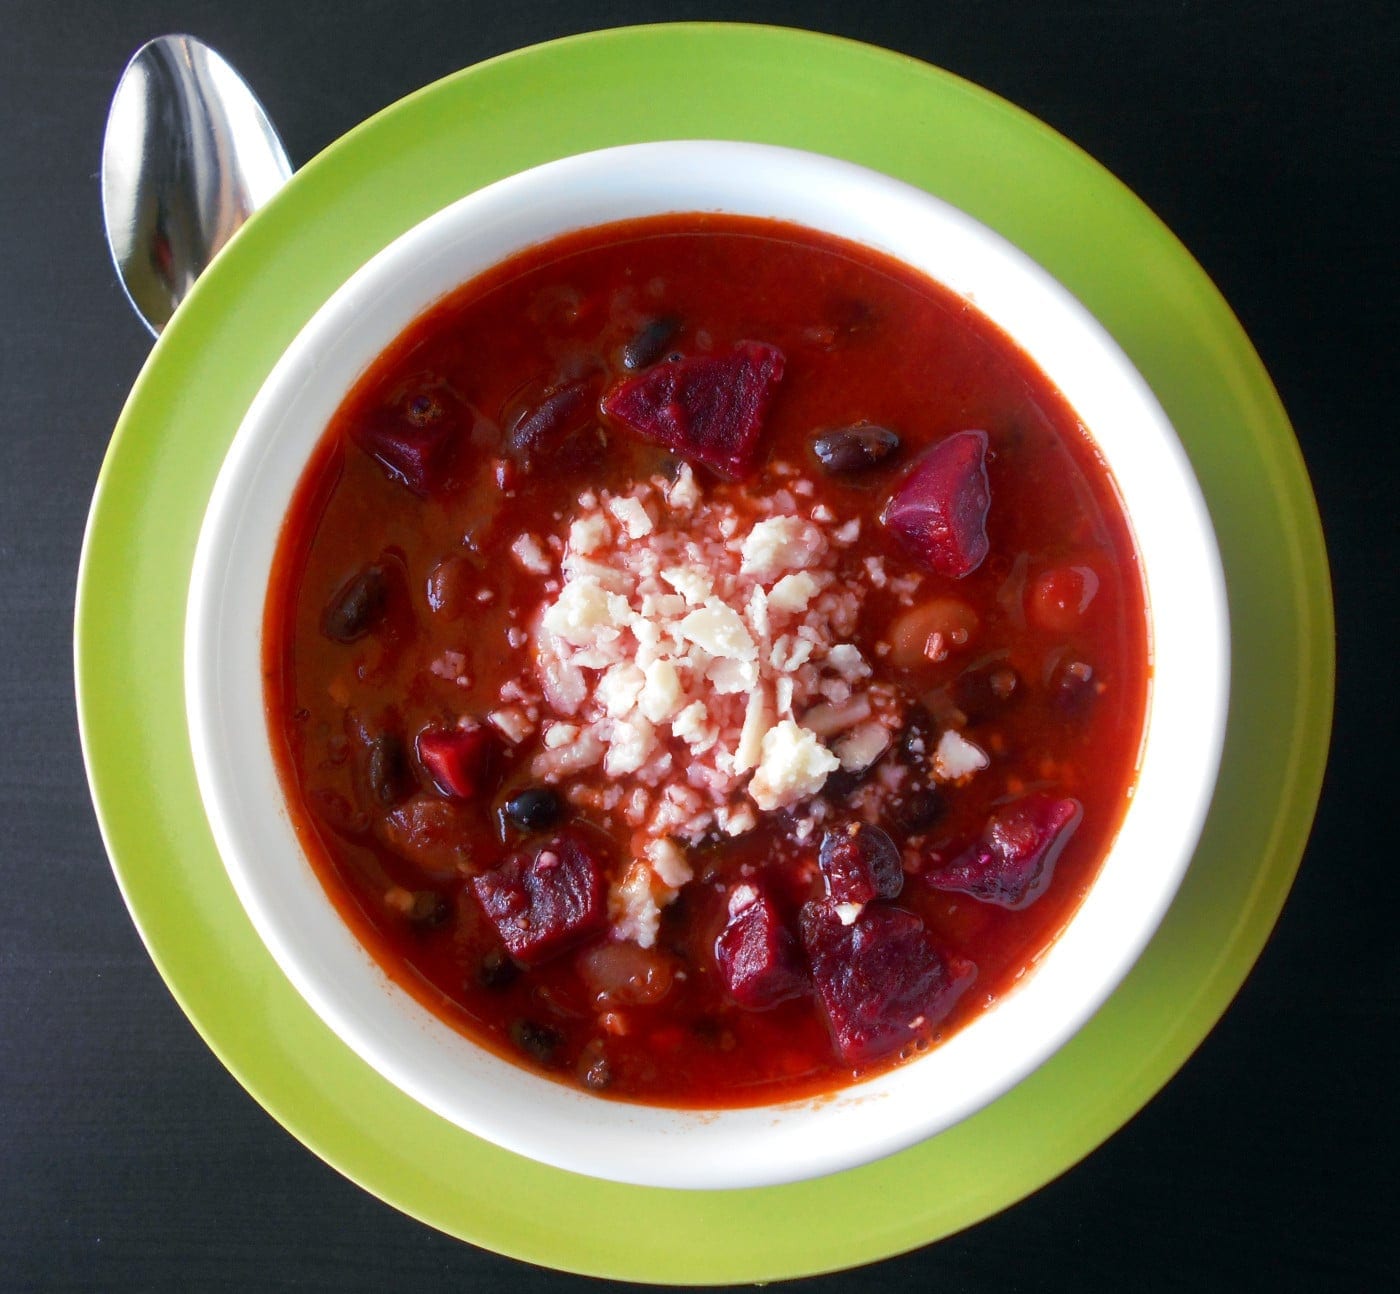 Overhead View of a White Bowl Filled with Vegetarian Beet Chili with Crumbled Romano Chili in the Middle of the Bowl. Bowl is on Top of a Light Green Plate. Top of a Silver Spoon is Visible on the Top Left Side of the Picture and It Is Under the Green Plate